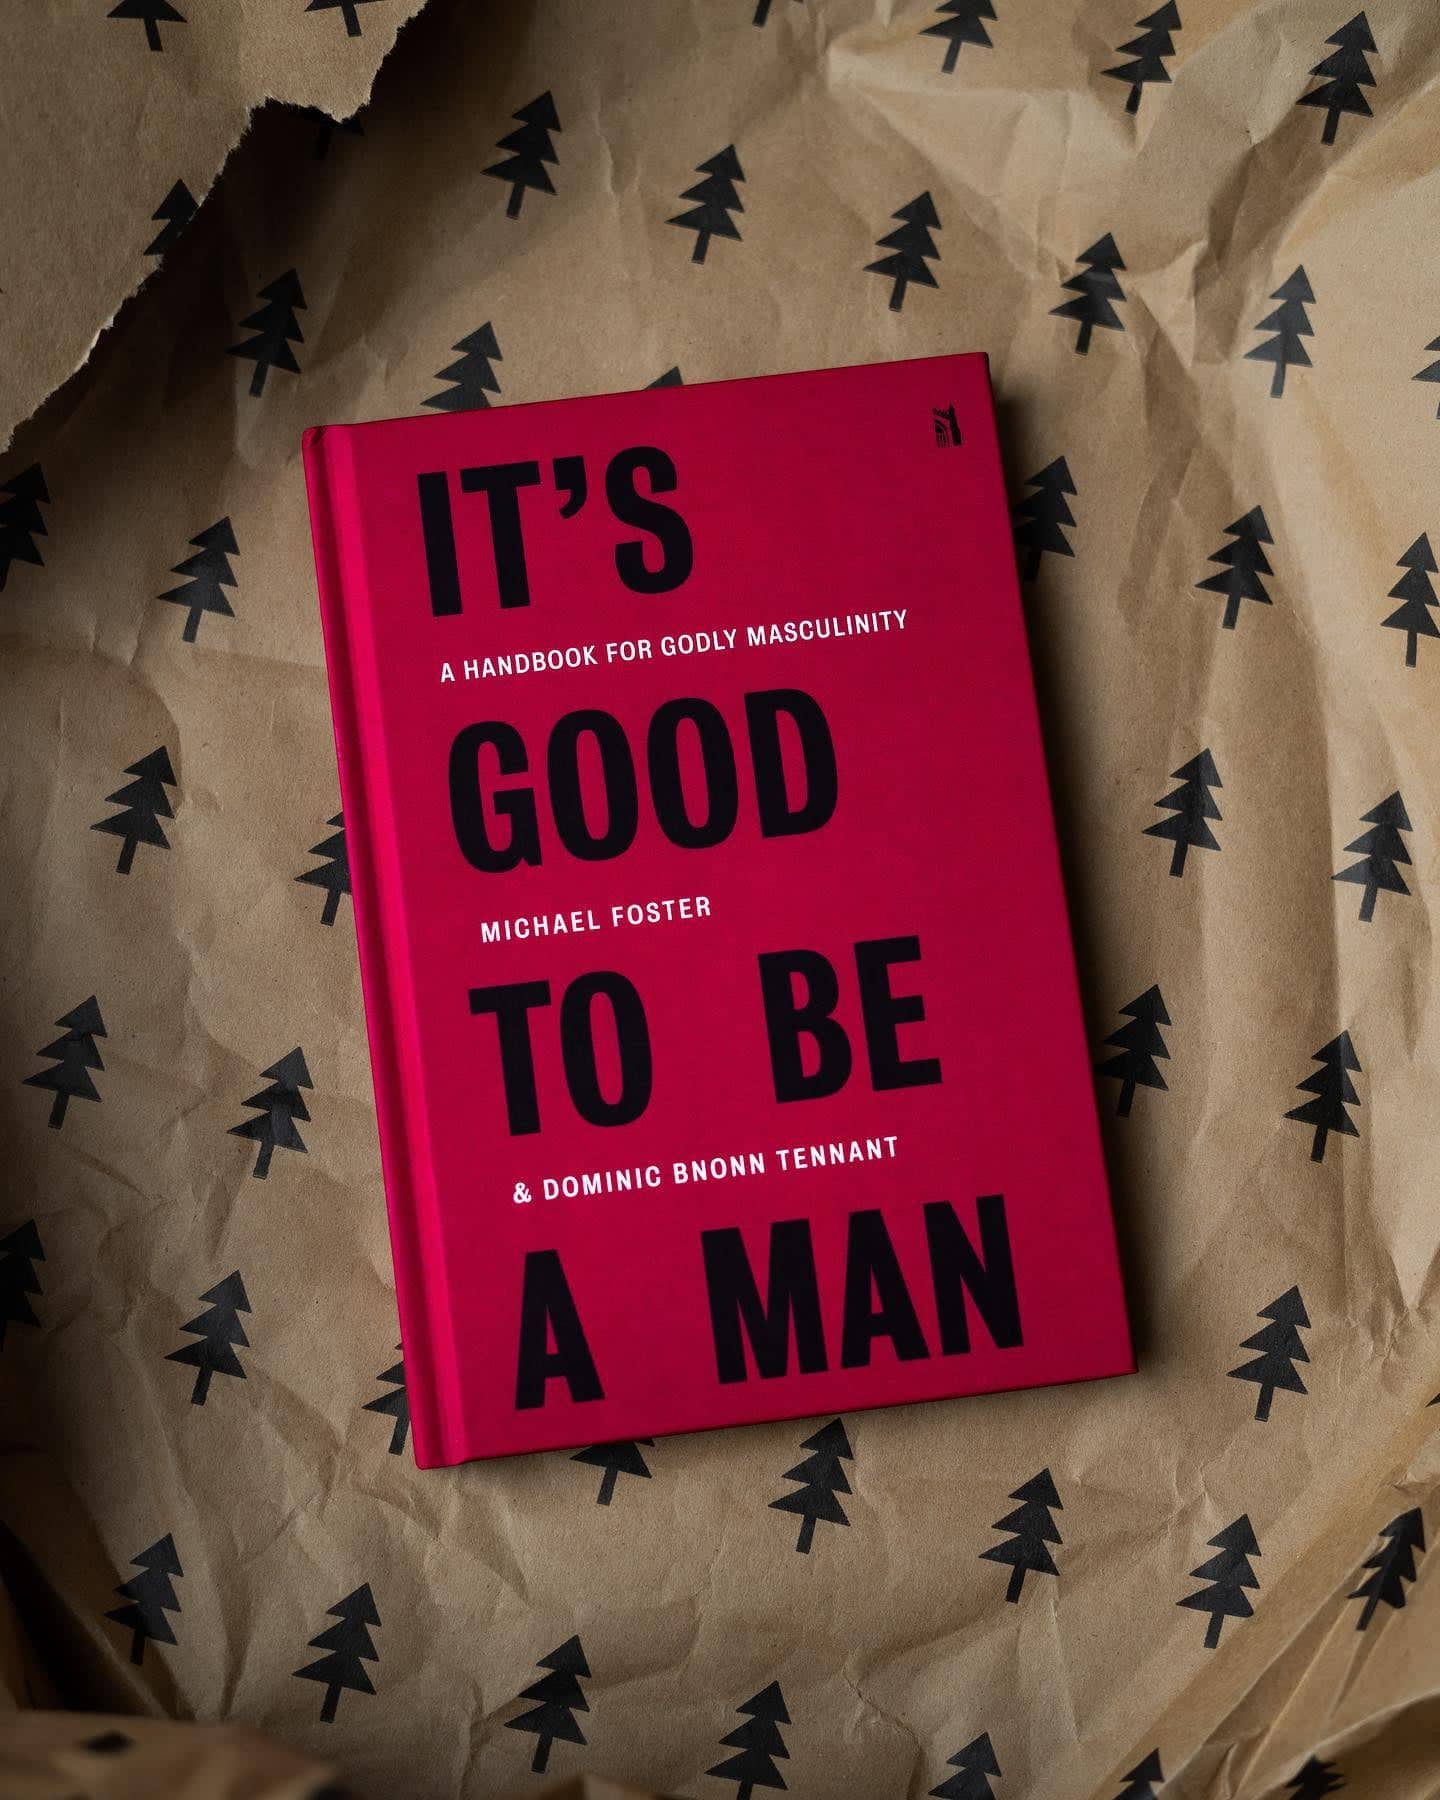 It's Good To Be A Man: A Handbook for Godly Masculinity, by Michael Foster & Dominic Bnonn Tennant